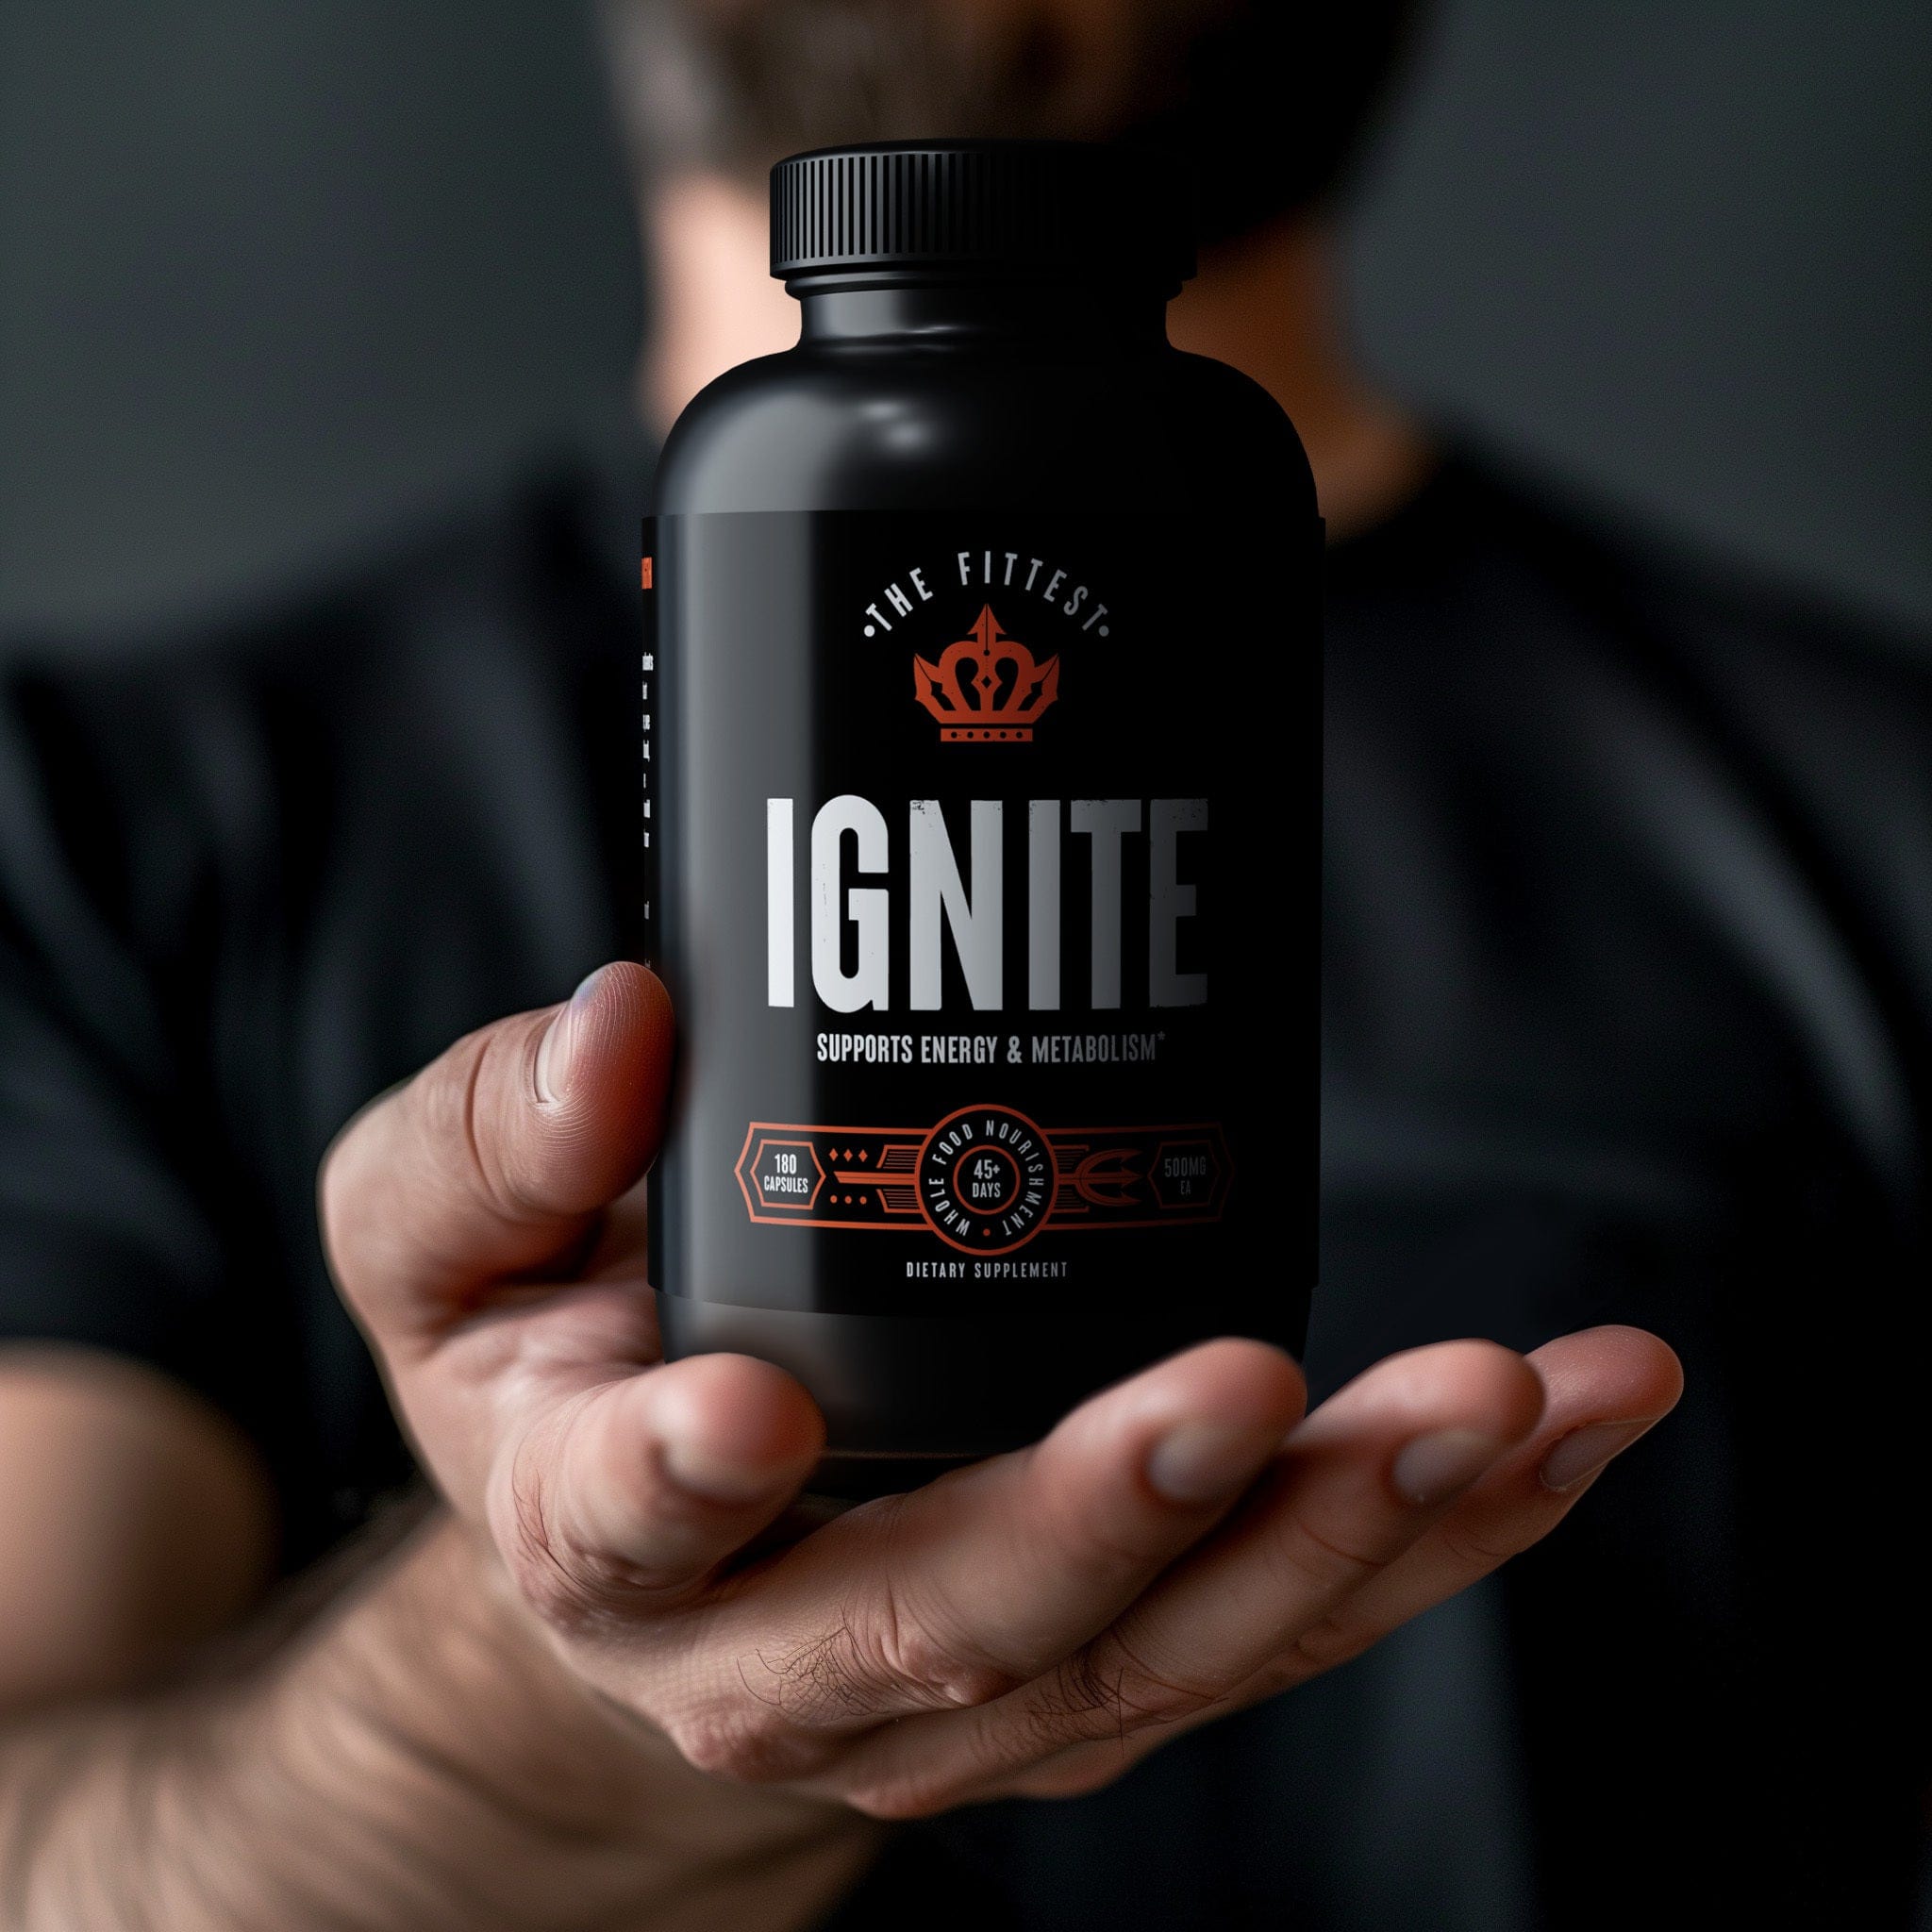 Man in black shirt holding out his hand presenting a bottle of Ignite